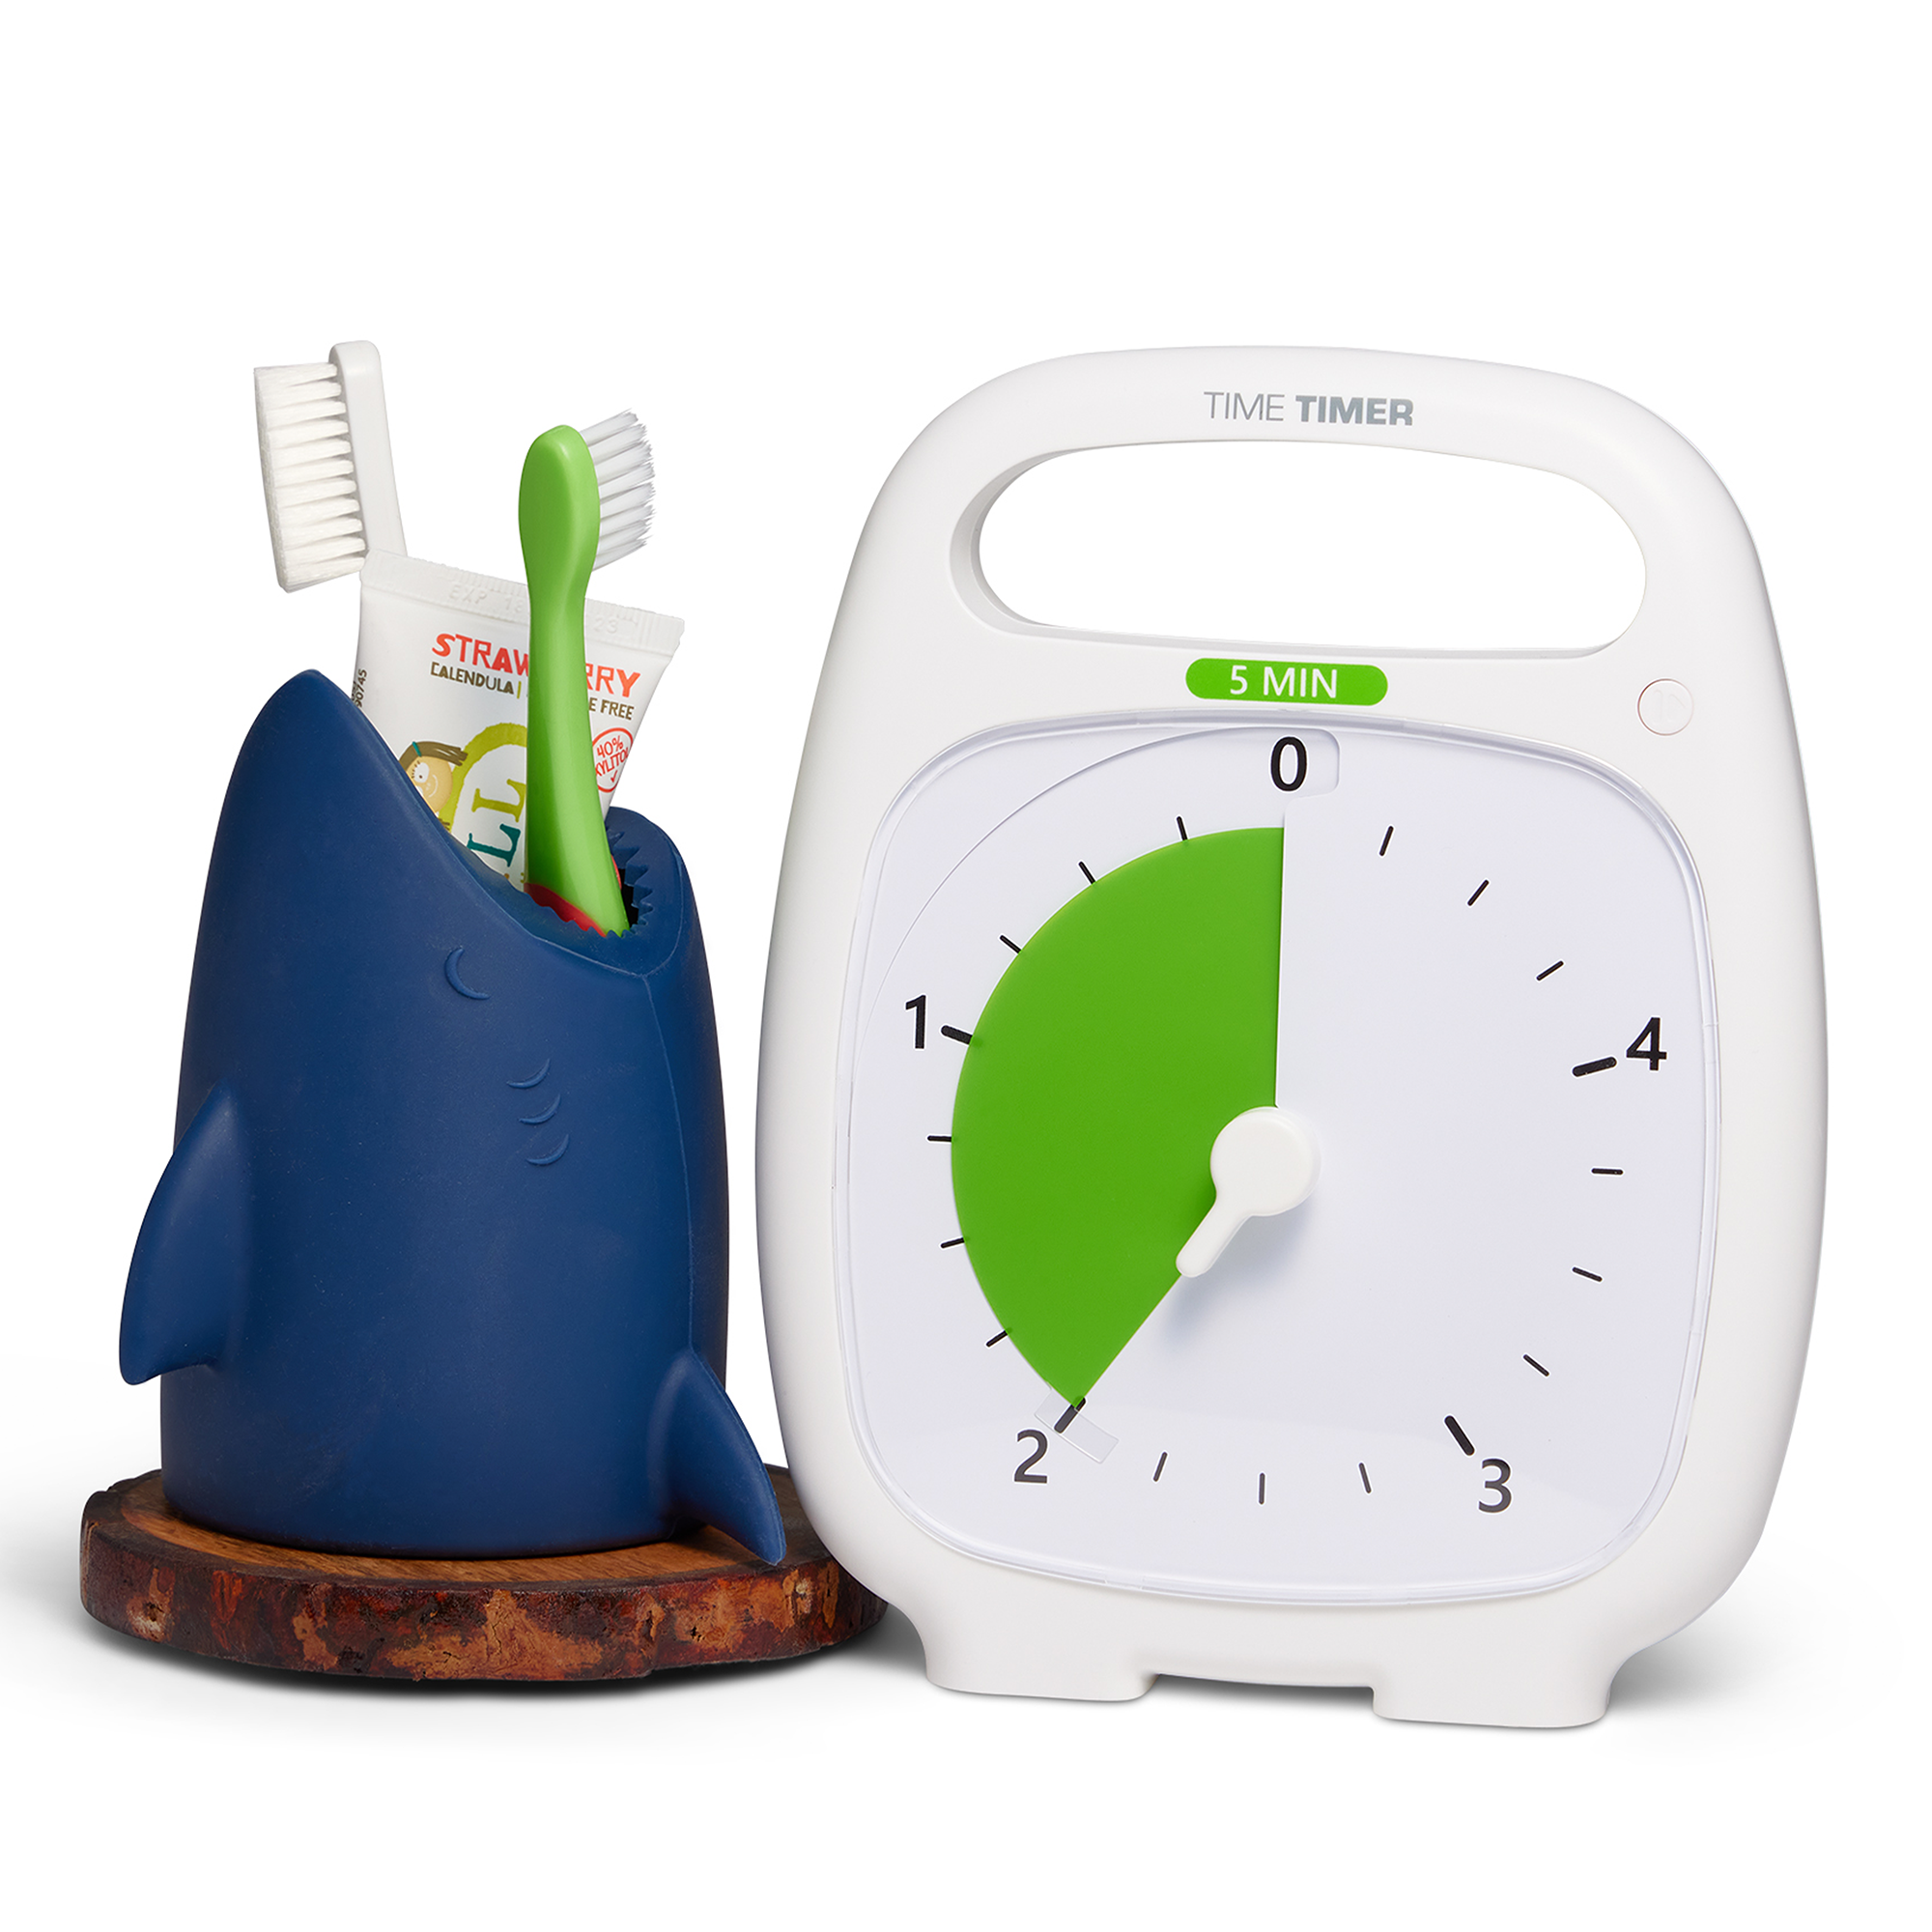 The Time Timer PLUS 5 minute visual timer is shown alongside a shark shaped toothbrush holder. The holder contains 2 toothbrushes and a small tube of toothpaste. The timer's green disk is set at 2 minutes - perfect for brushing teeth!